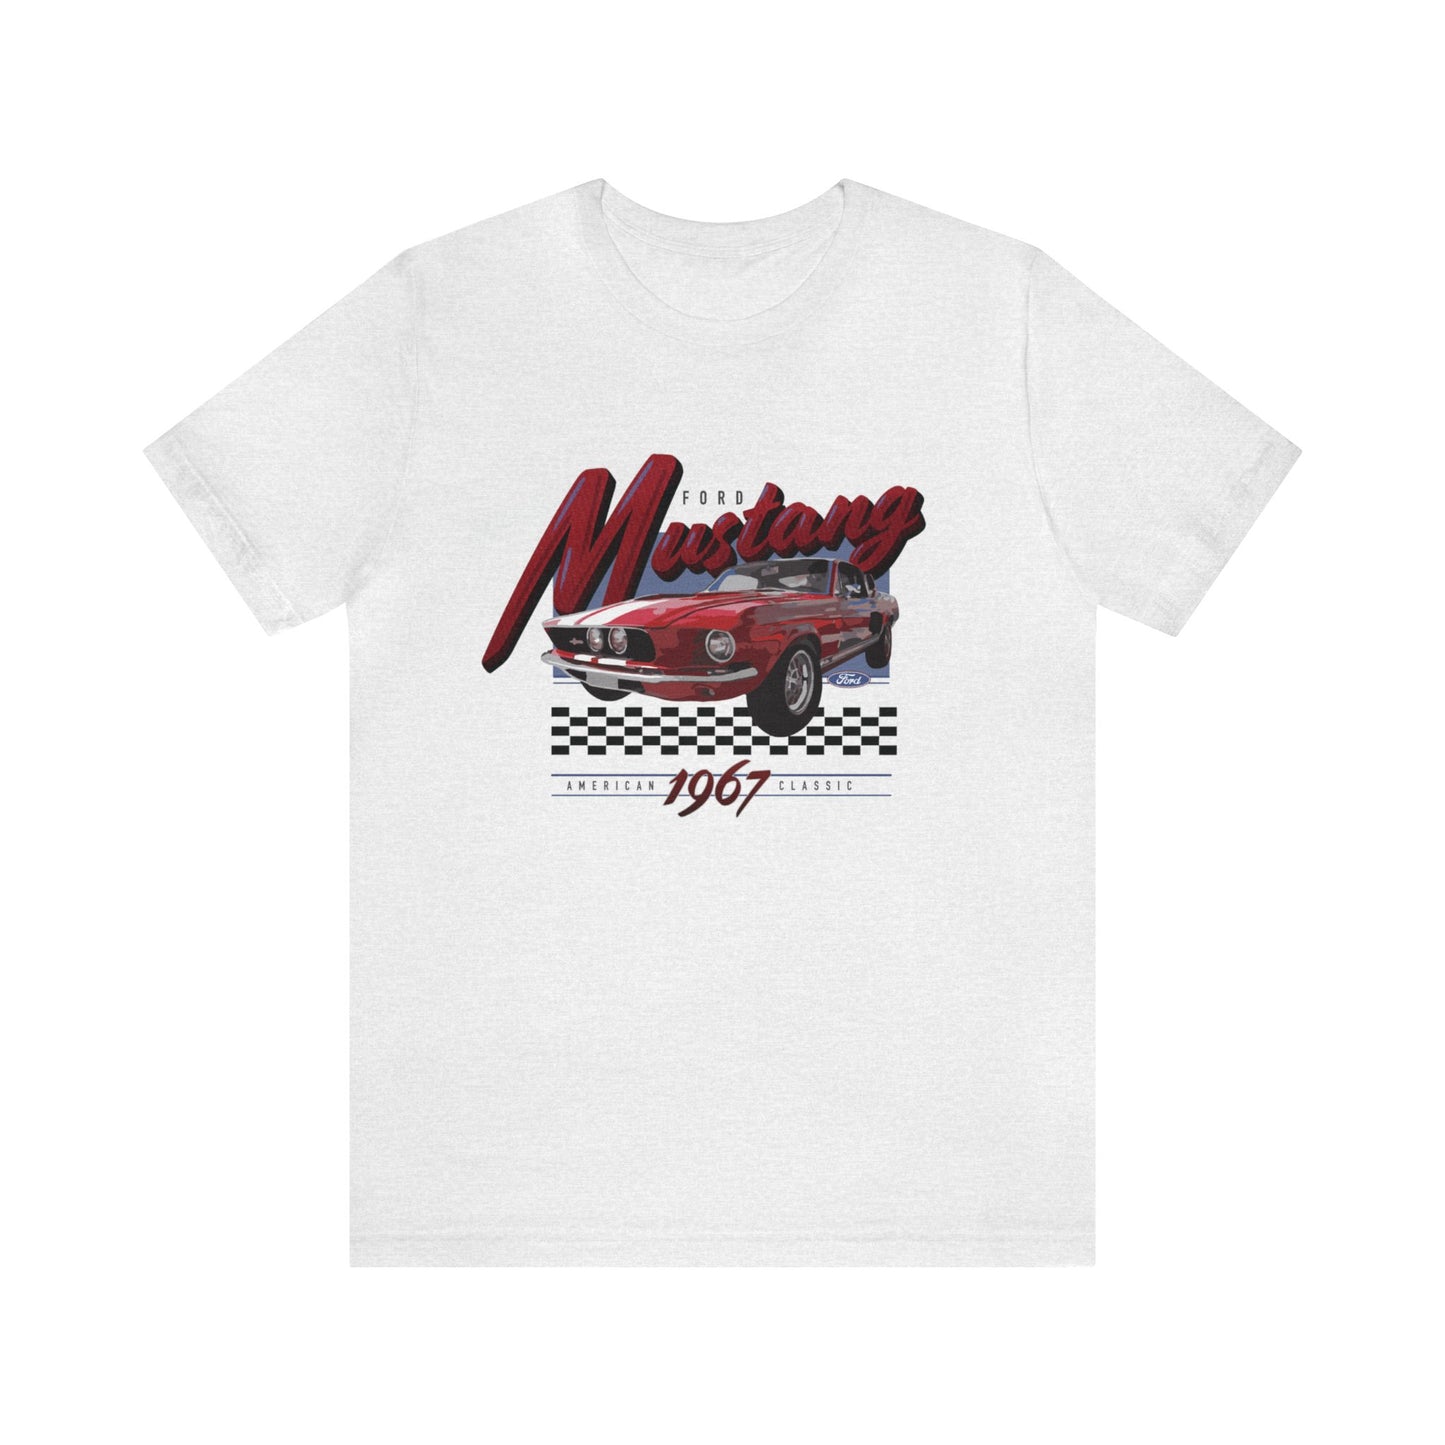 Vintage Mustang Graphic Tee